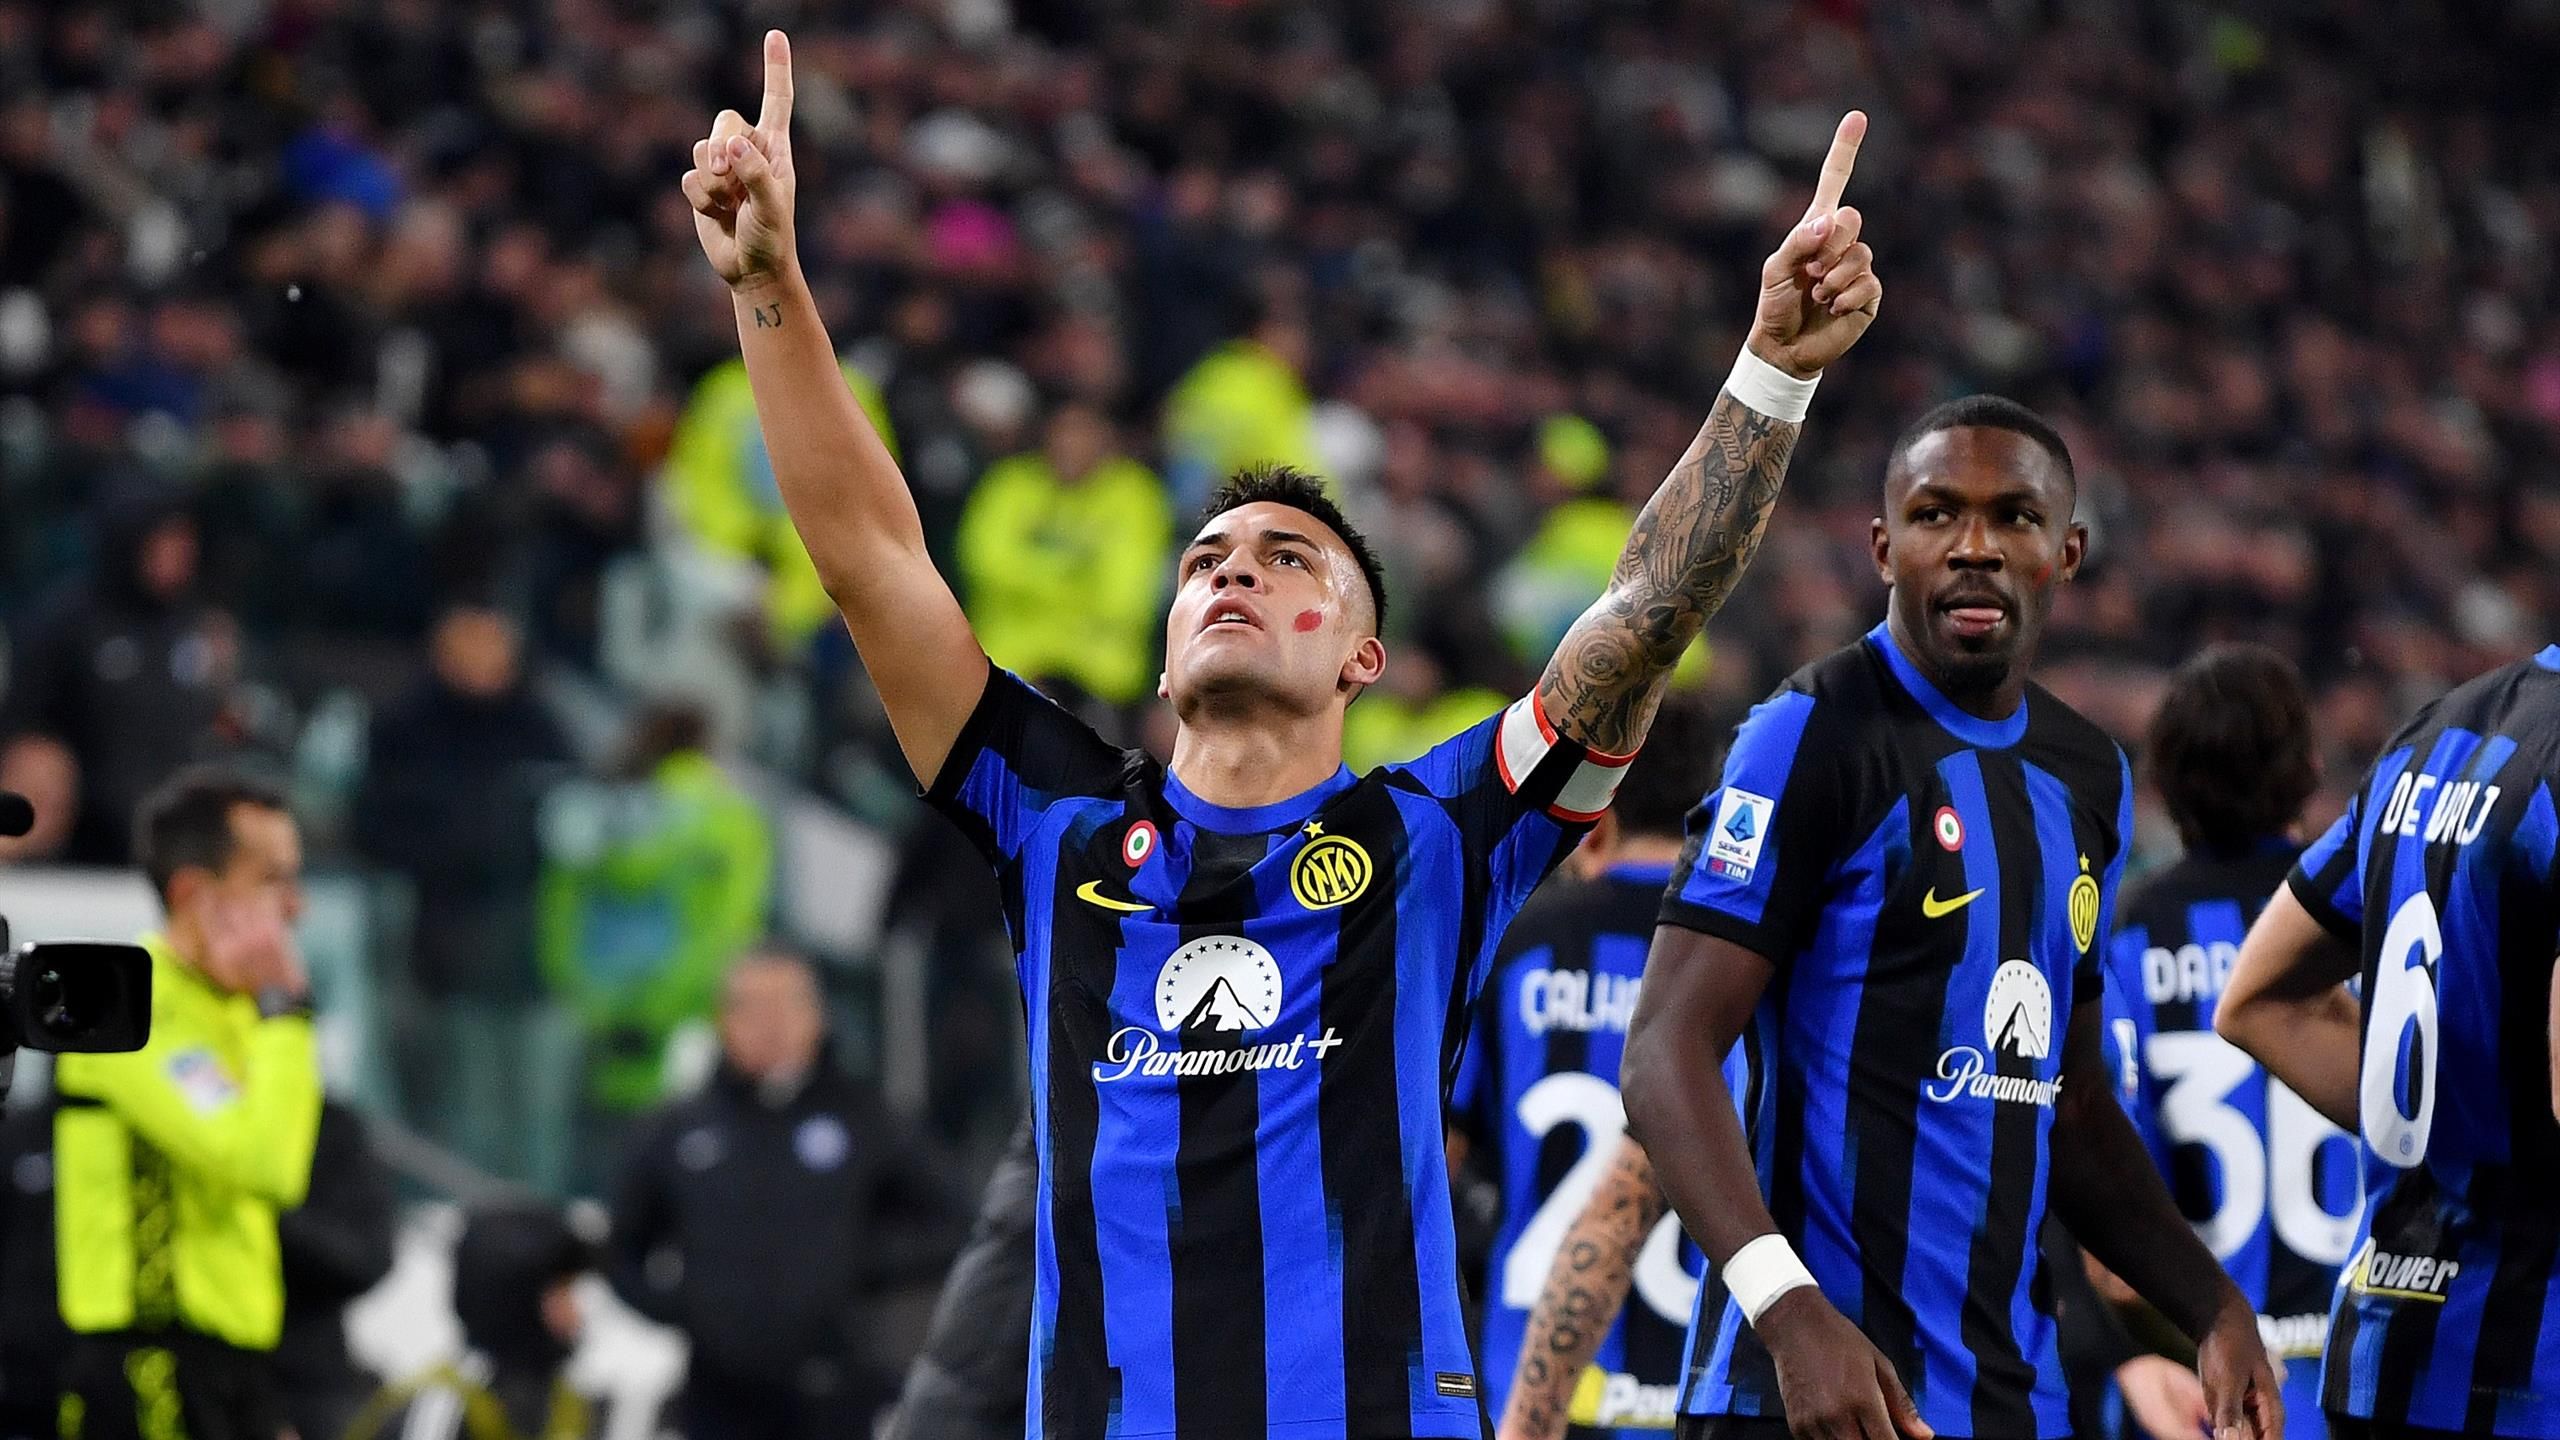 Inter vs Juventus: 6 of the best games in the Derby d'Italia's history